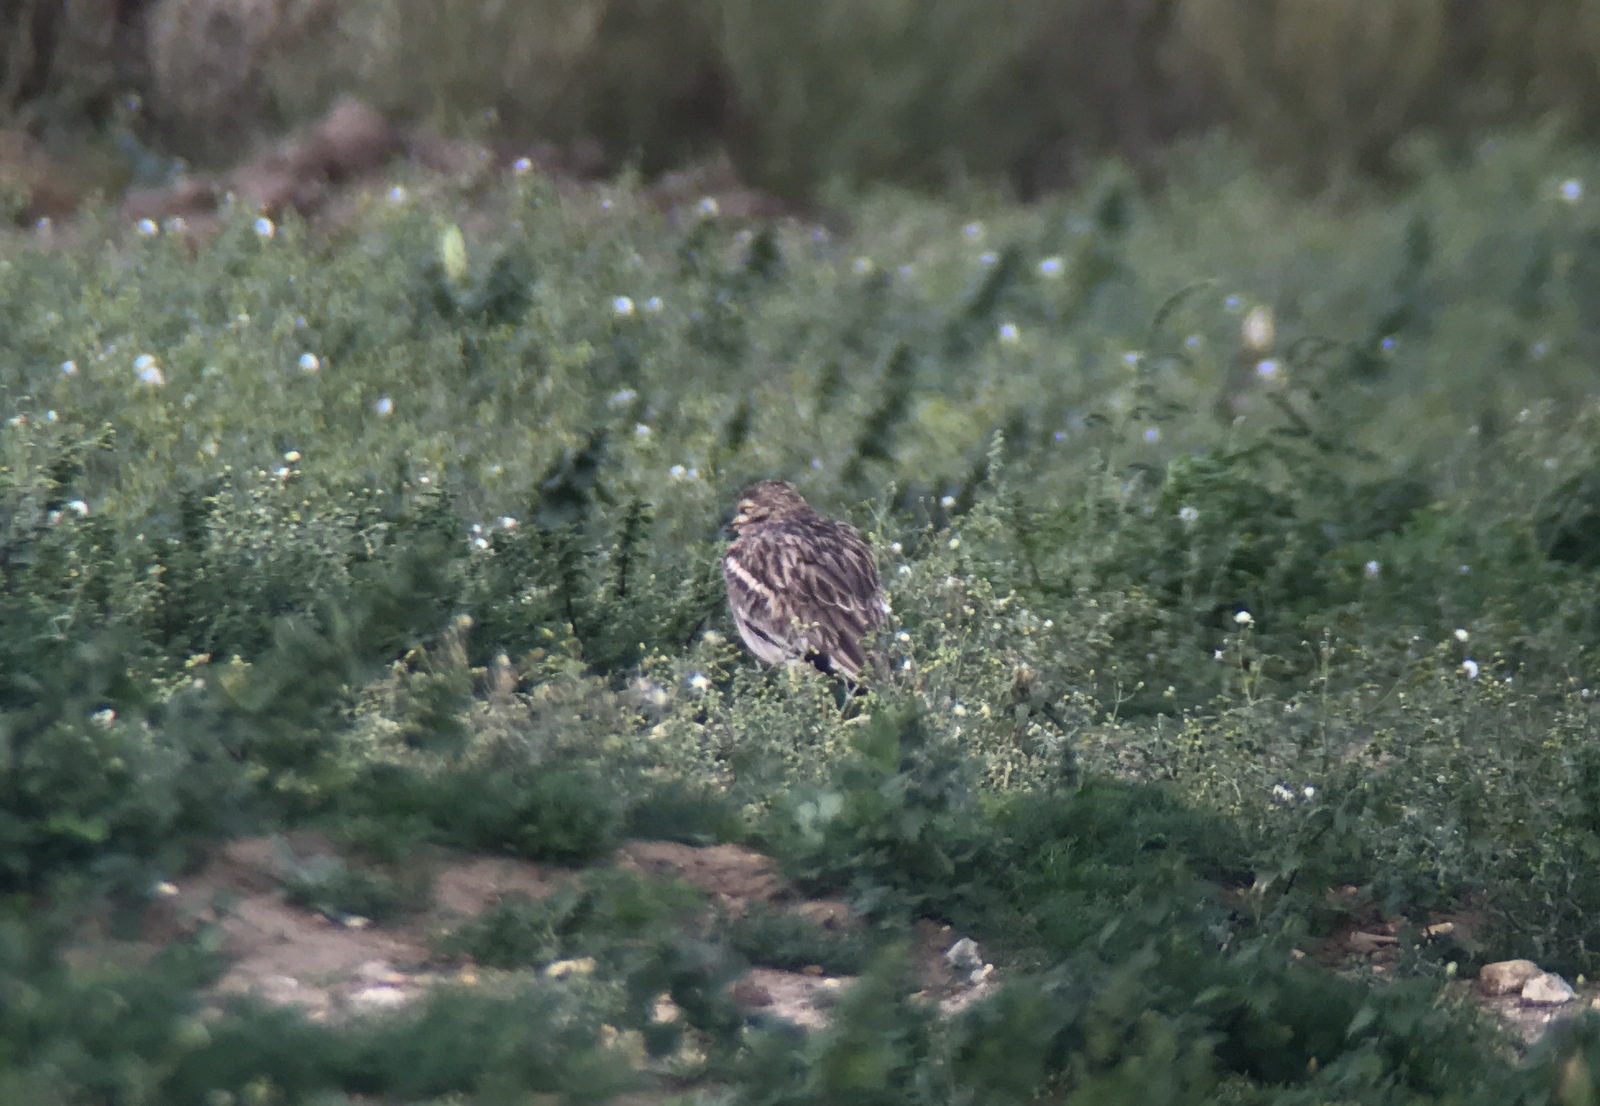 Stone Curlew 1